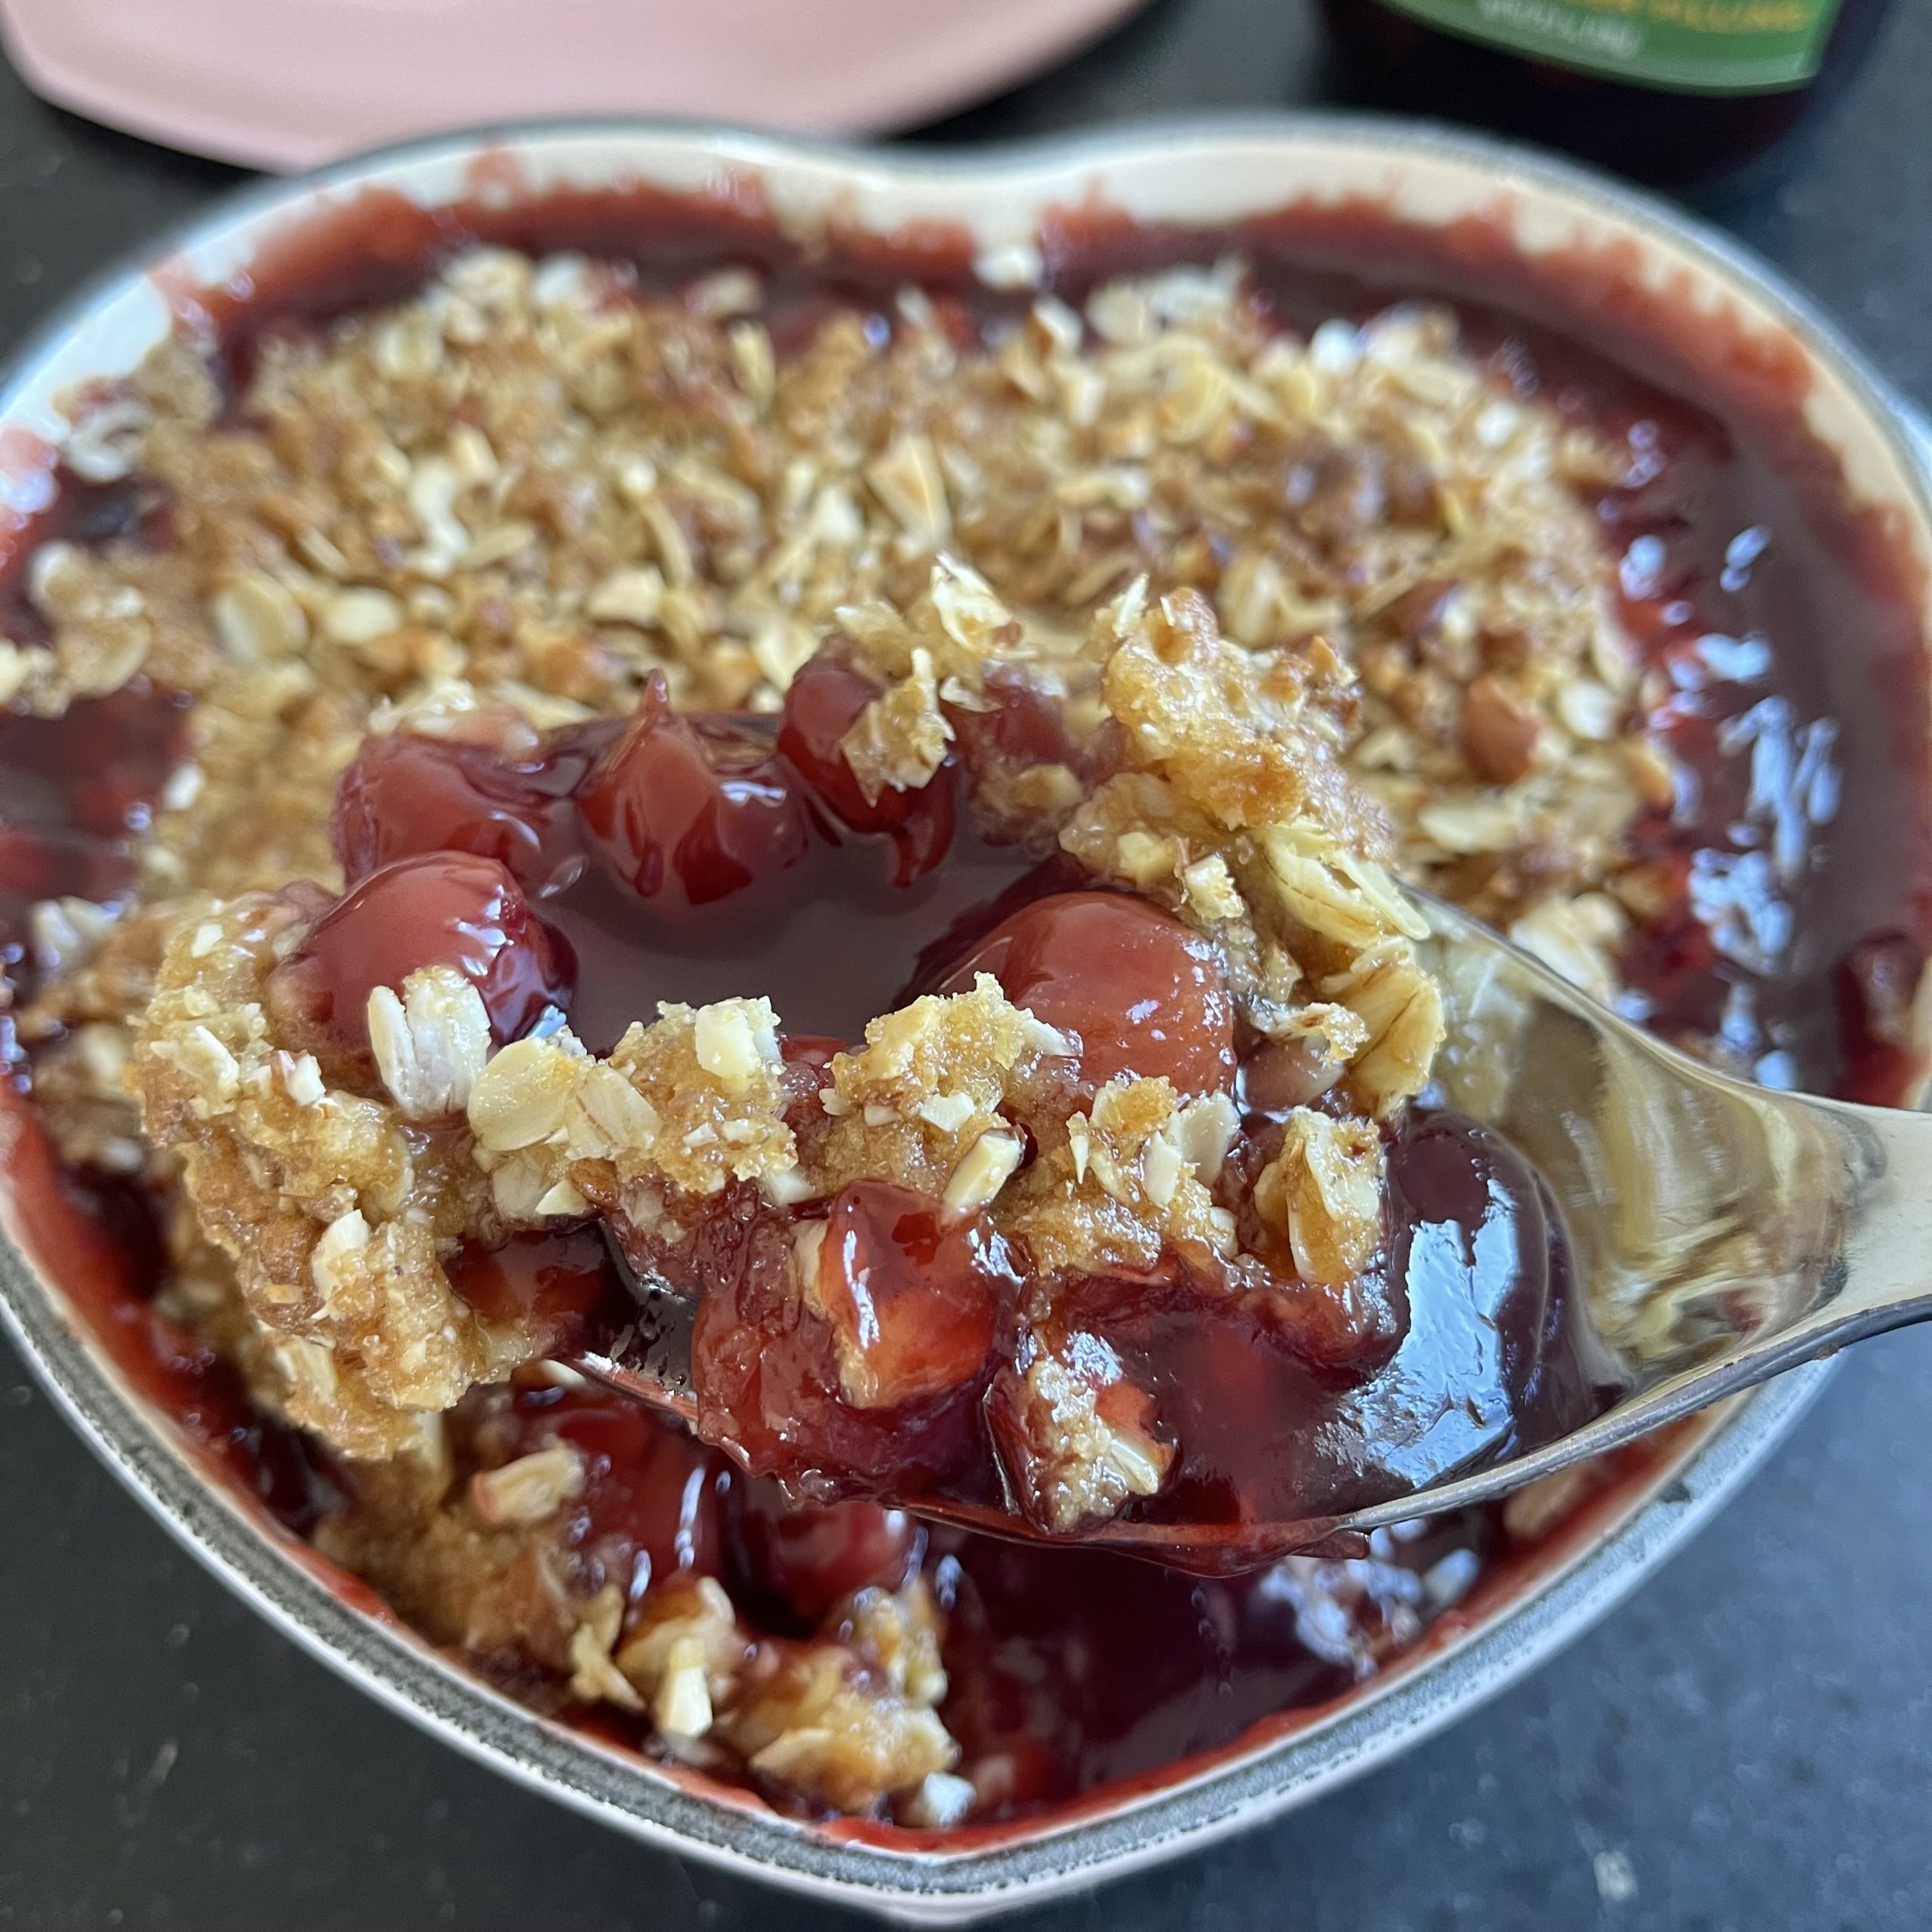 Cherry Crisp with Almond Topping